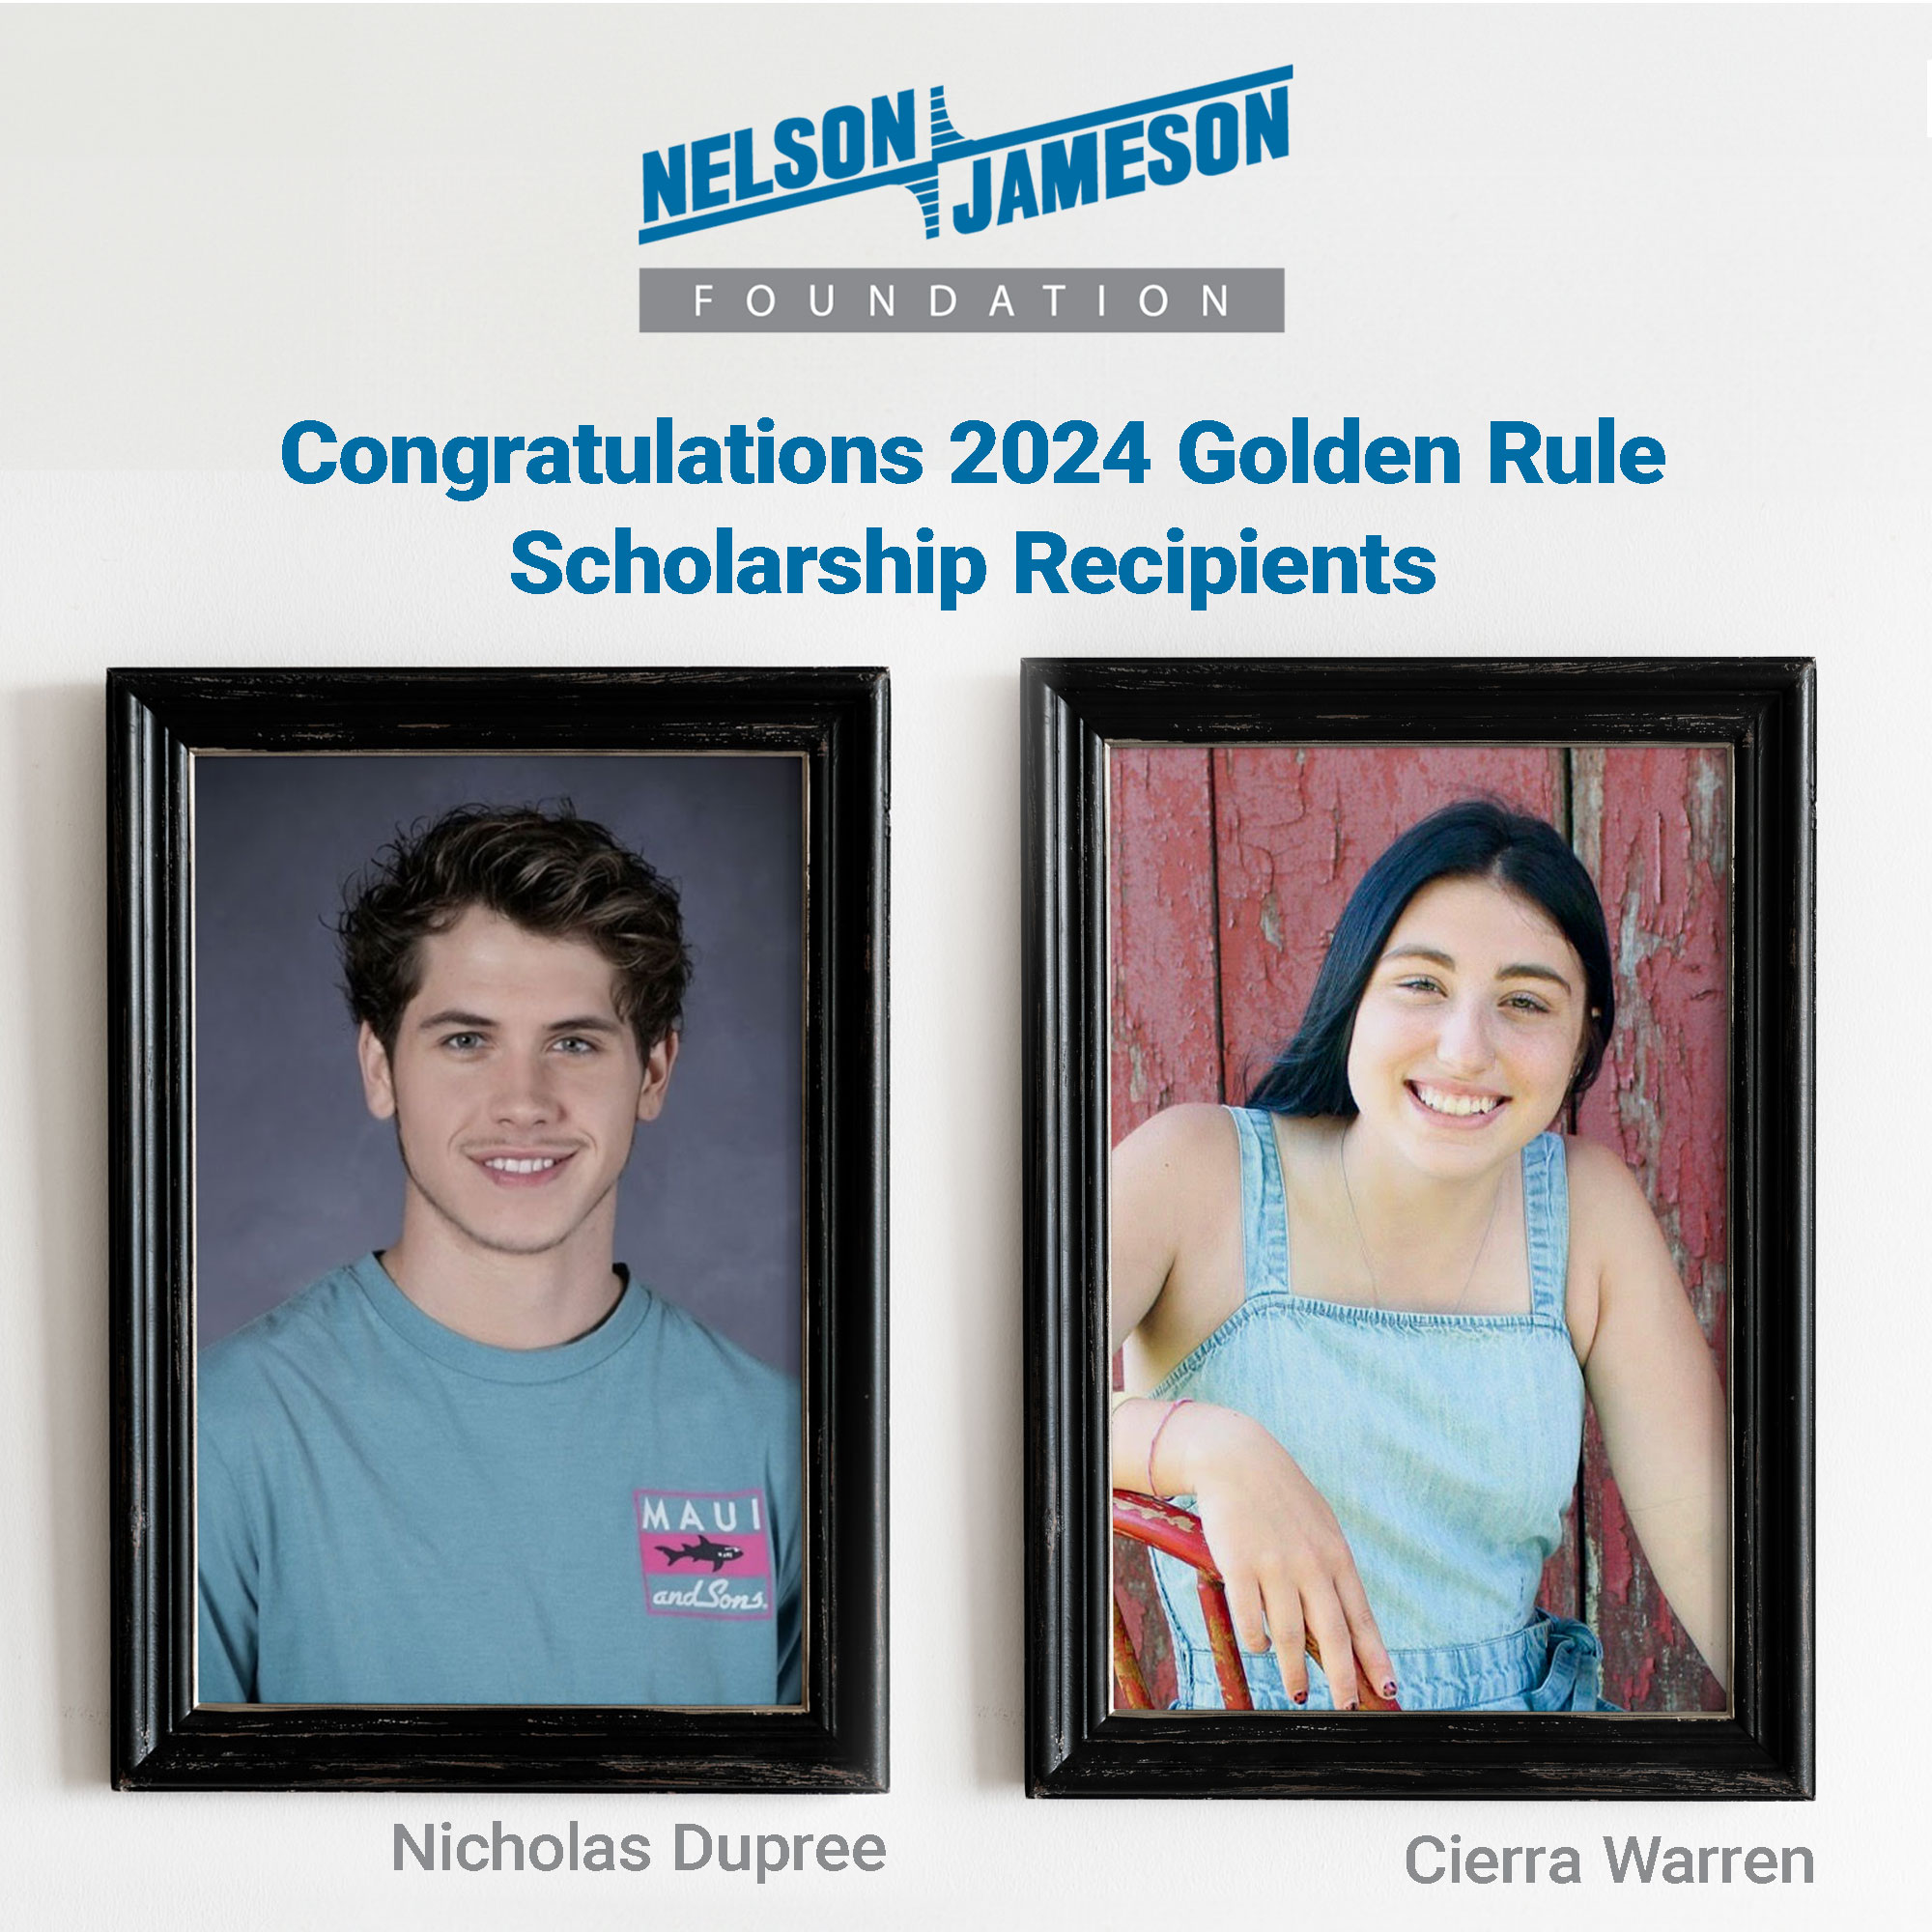 Food processing distributor Nelson-Jameson announces second annual college scholarship winners